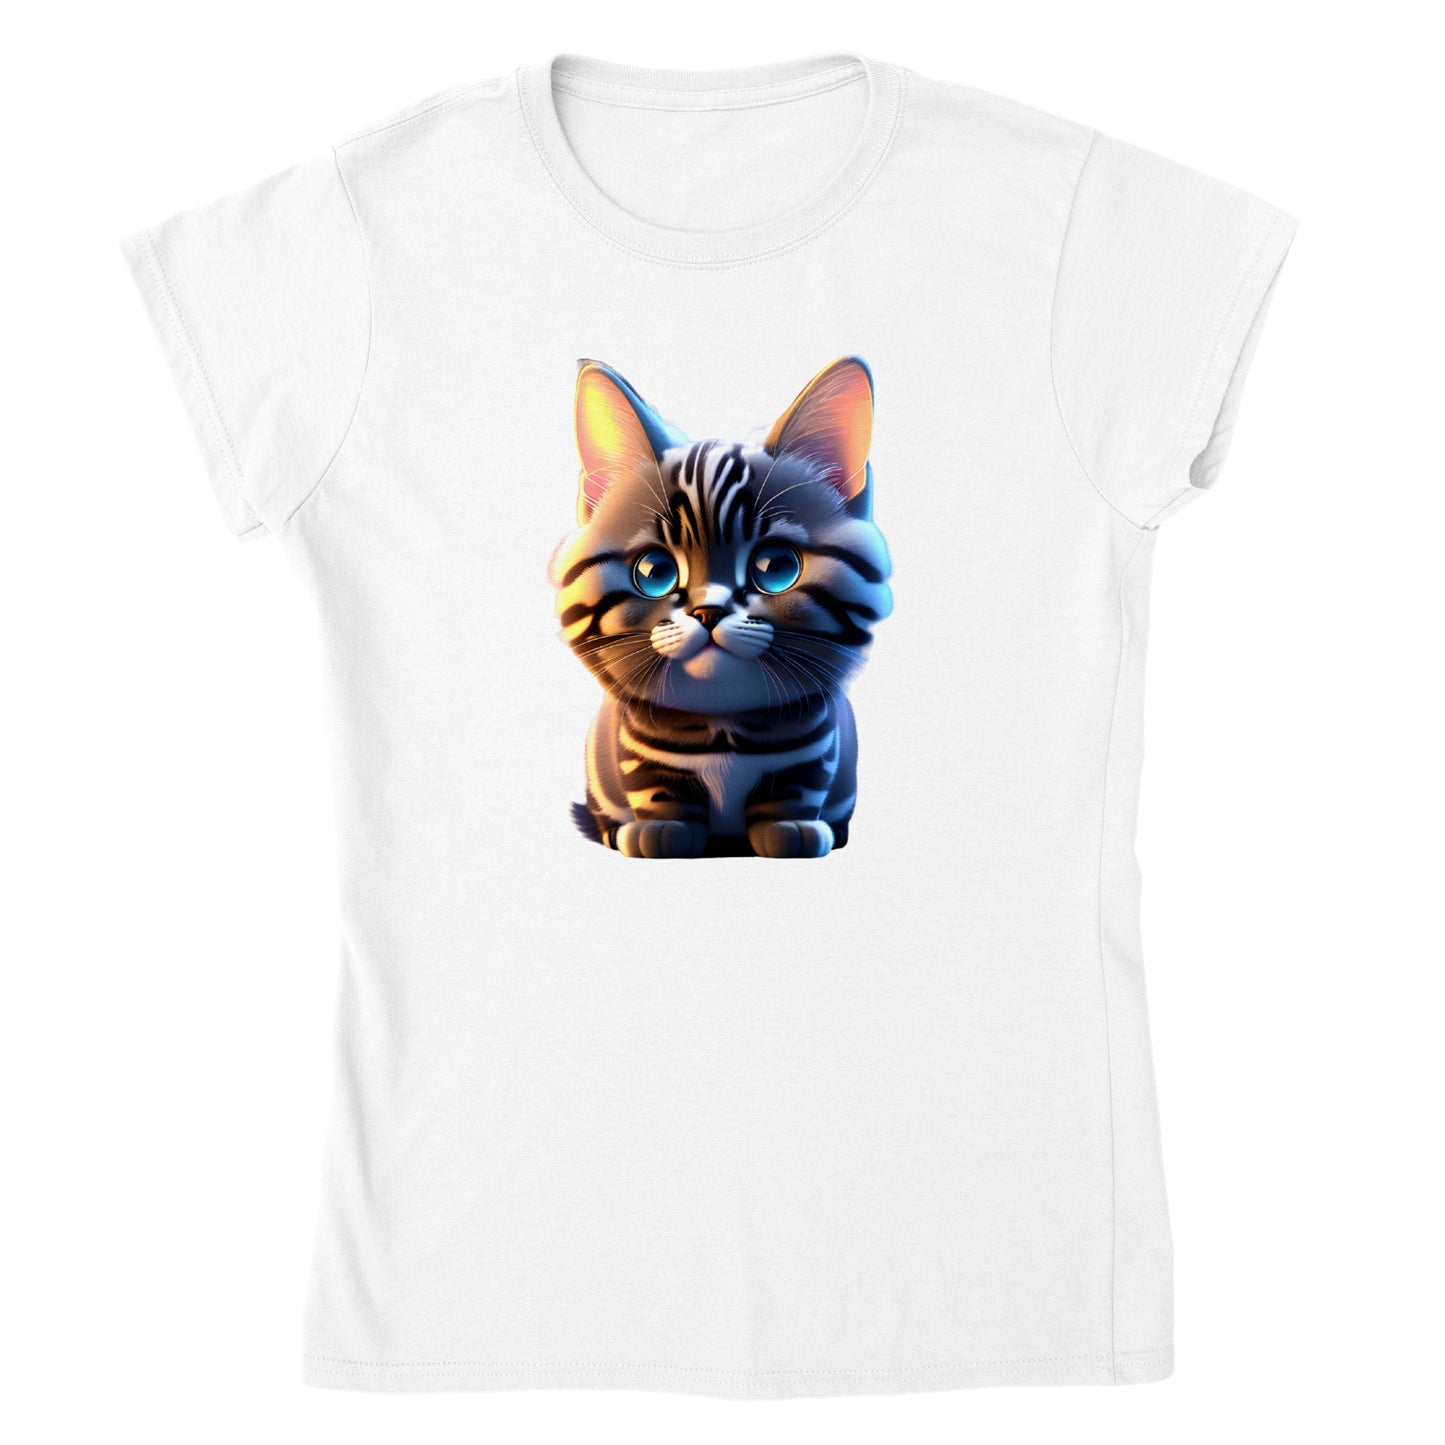 Adorable, Cool, Cute Cats and Kittens Toy - Classic Women’s Crewneck T-Shirt 14